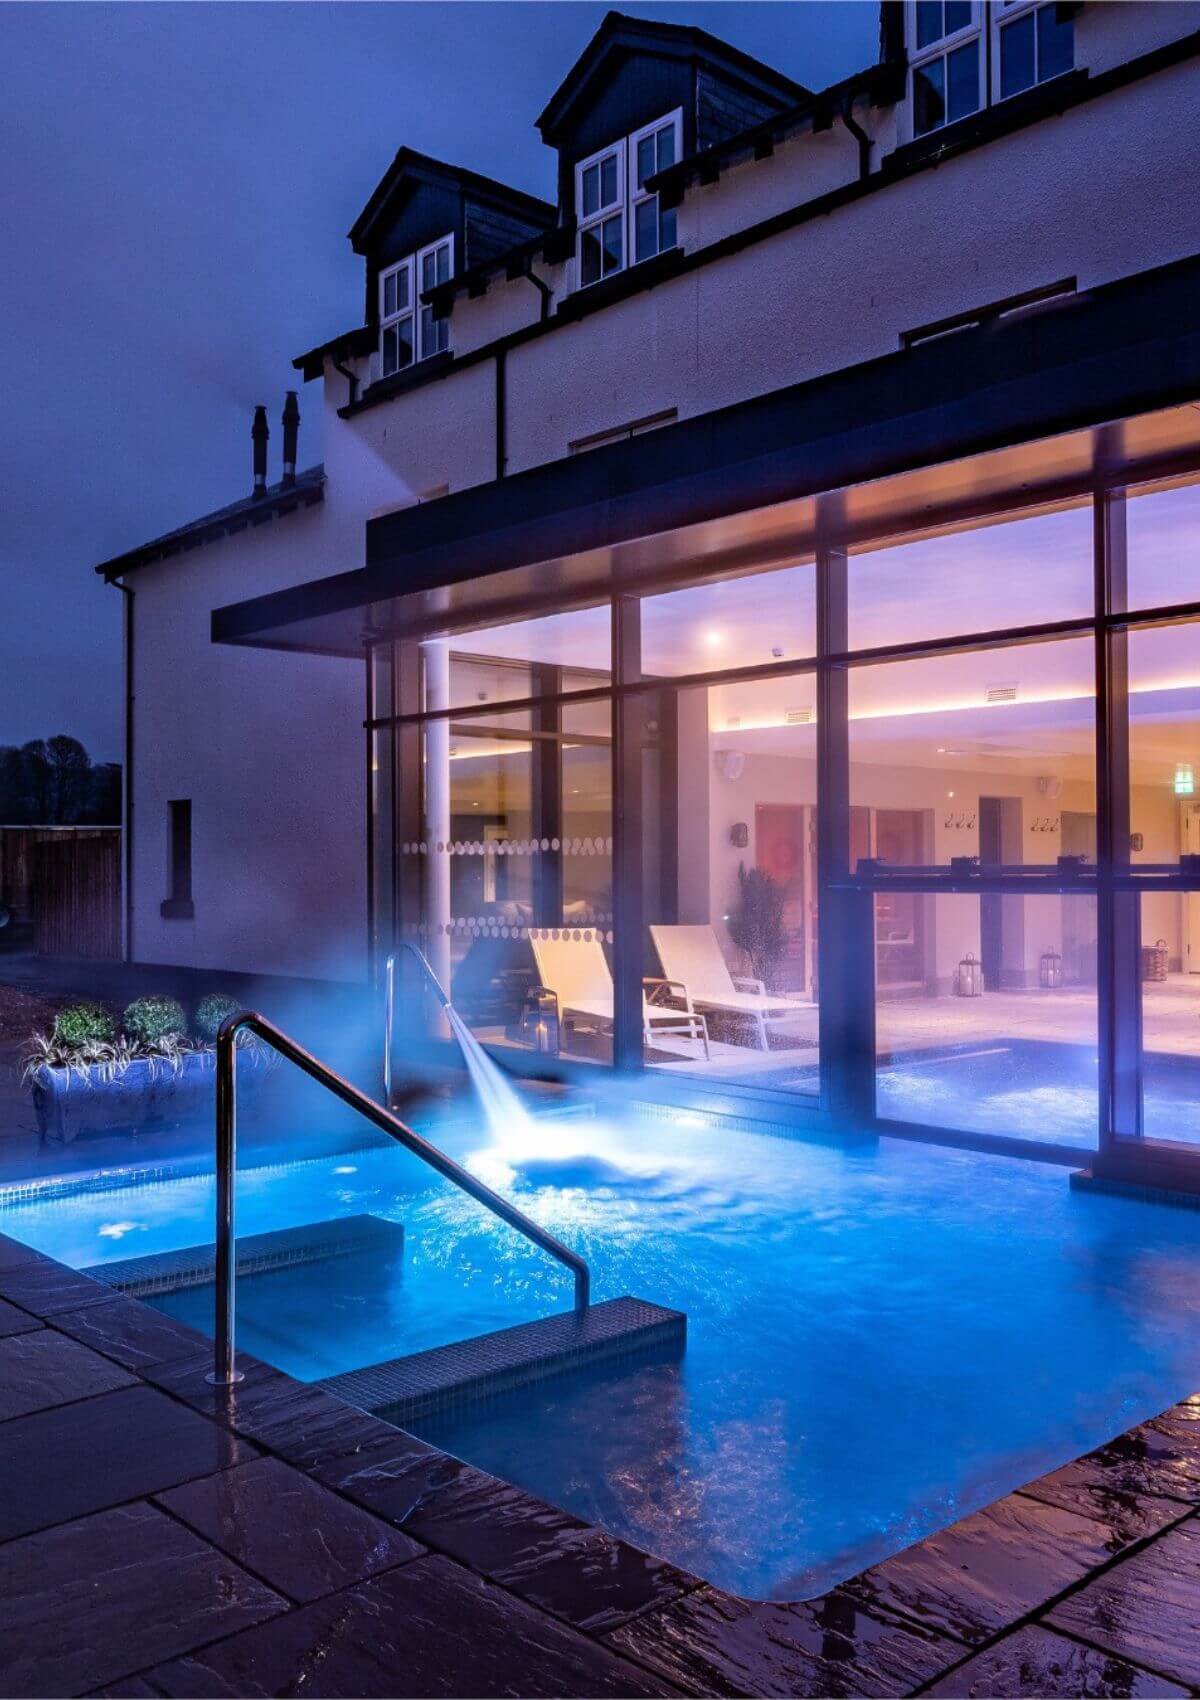 Windermere spa days at The Swan Hotel & Spa